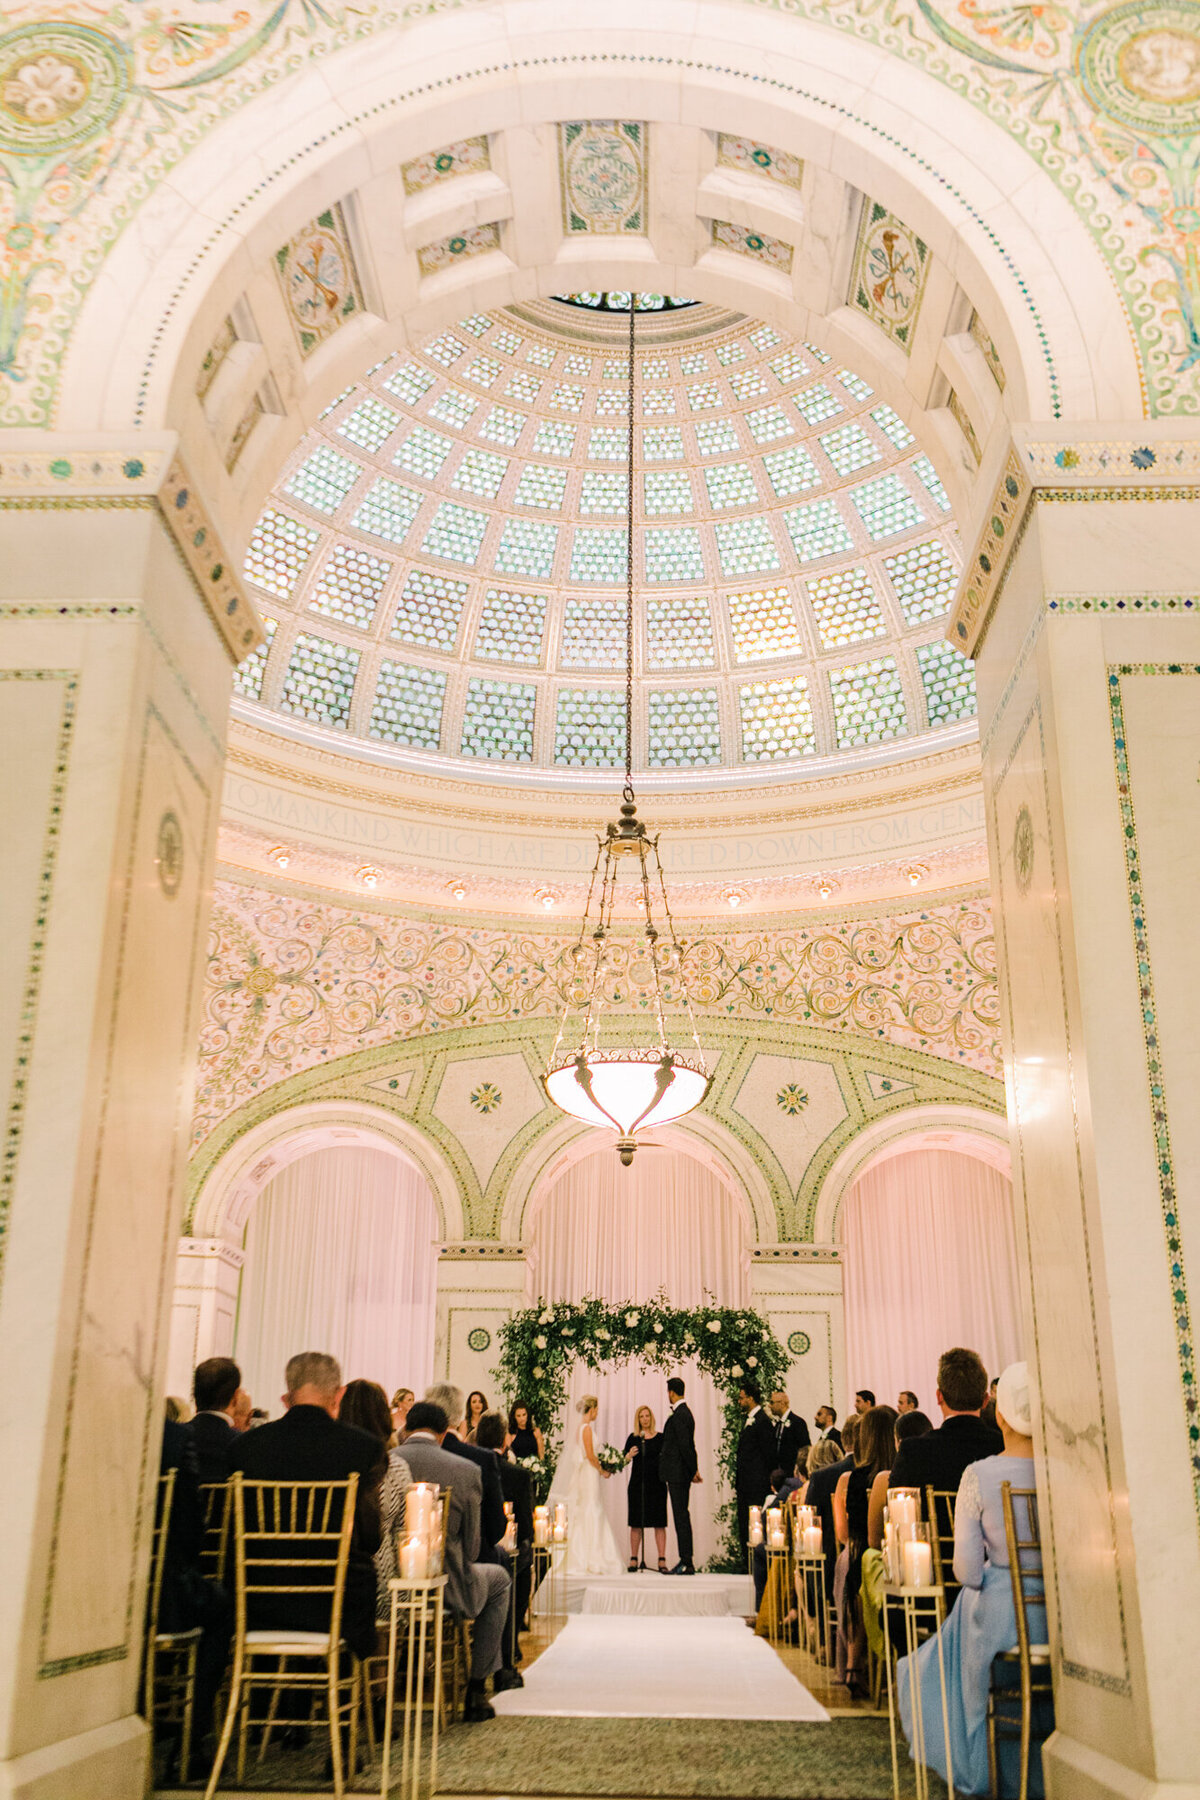 A beautiful wedding ceremony taken at the historic Chicago Cultural Center